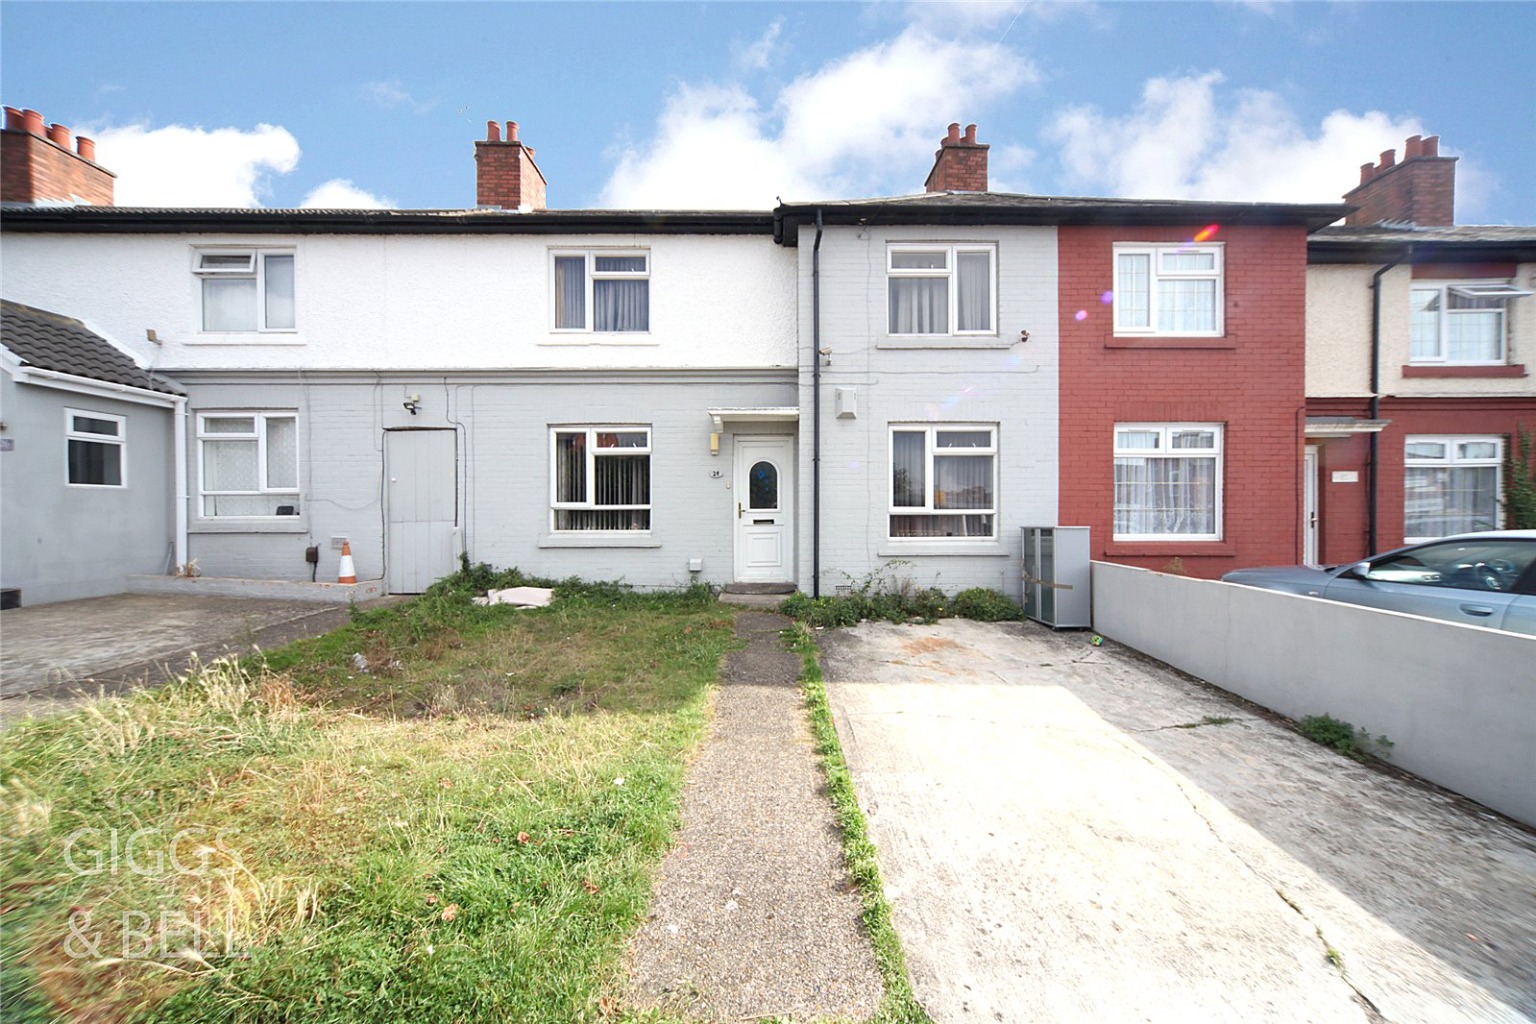 3 bed terraced house for sale in Denbigh Road, Luton, LU3 